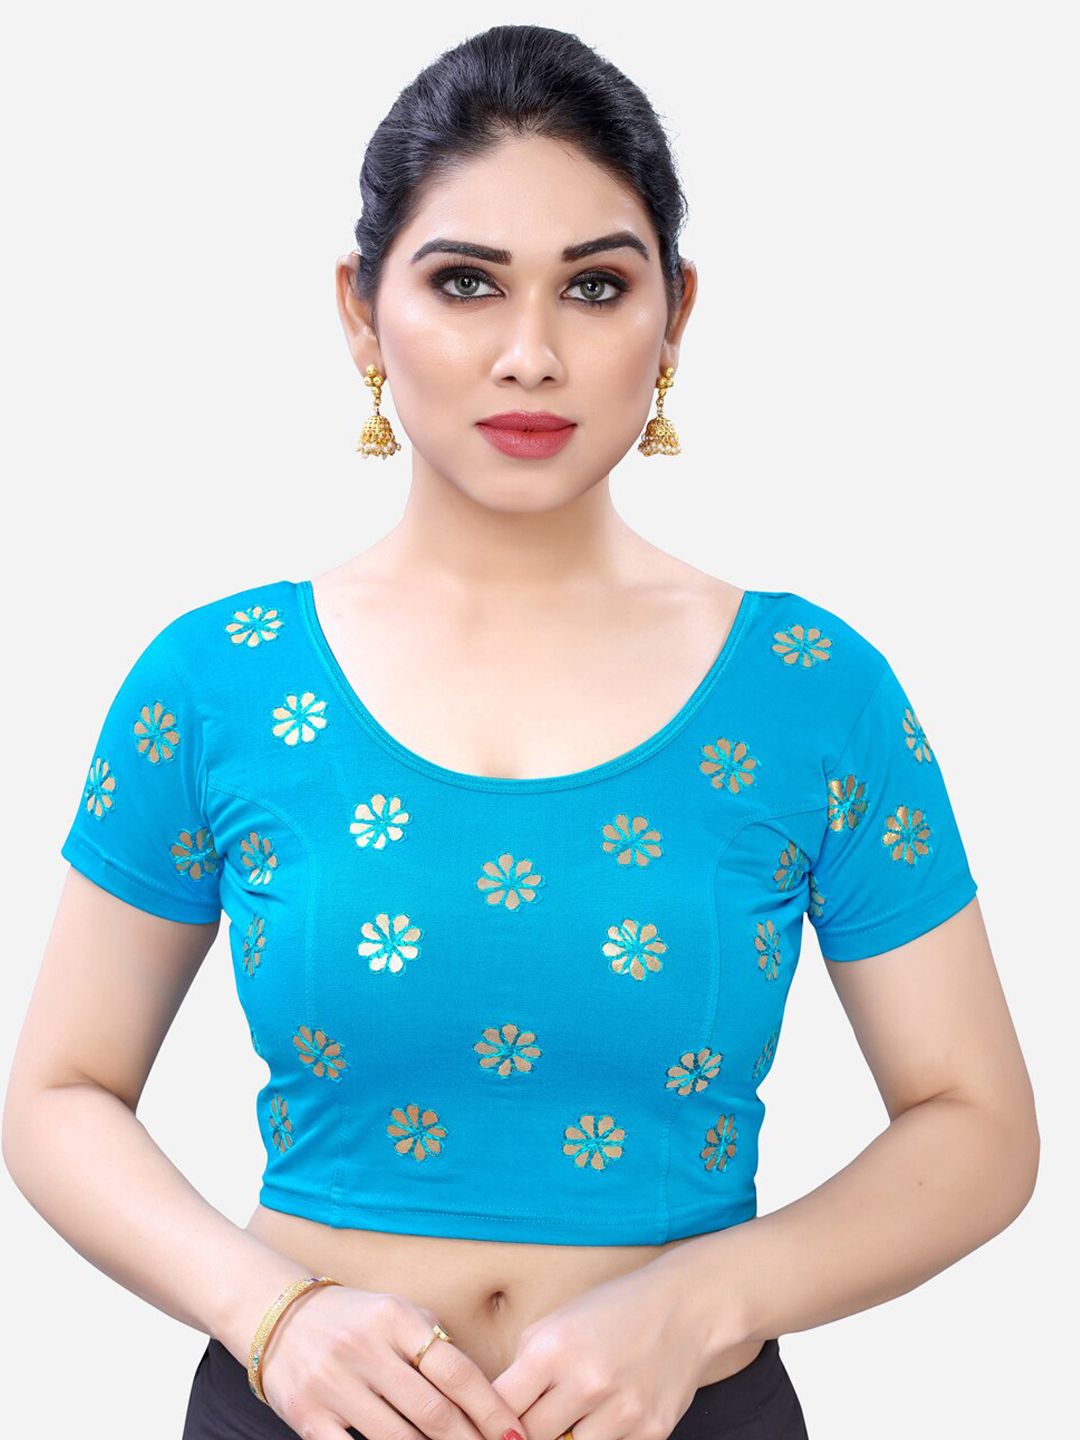 SIRIL Blue Embroidered Saree Blouse Price in India